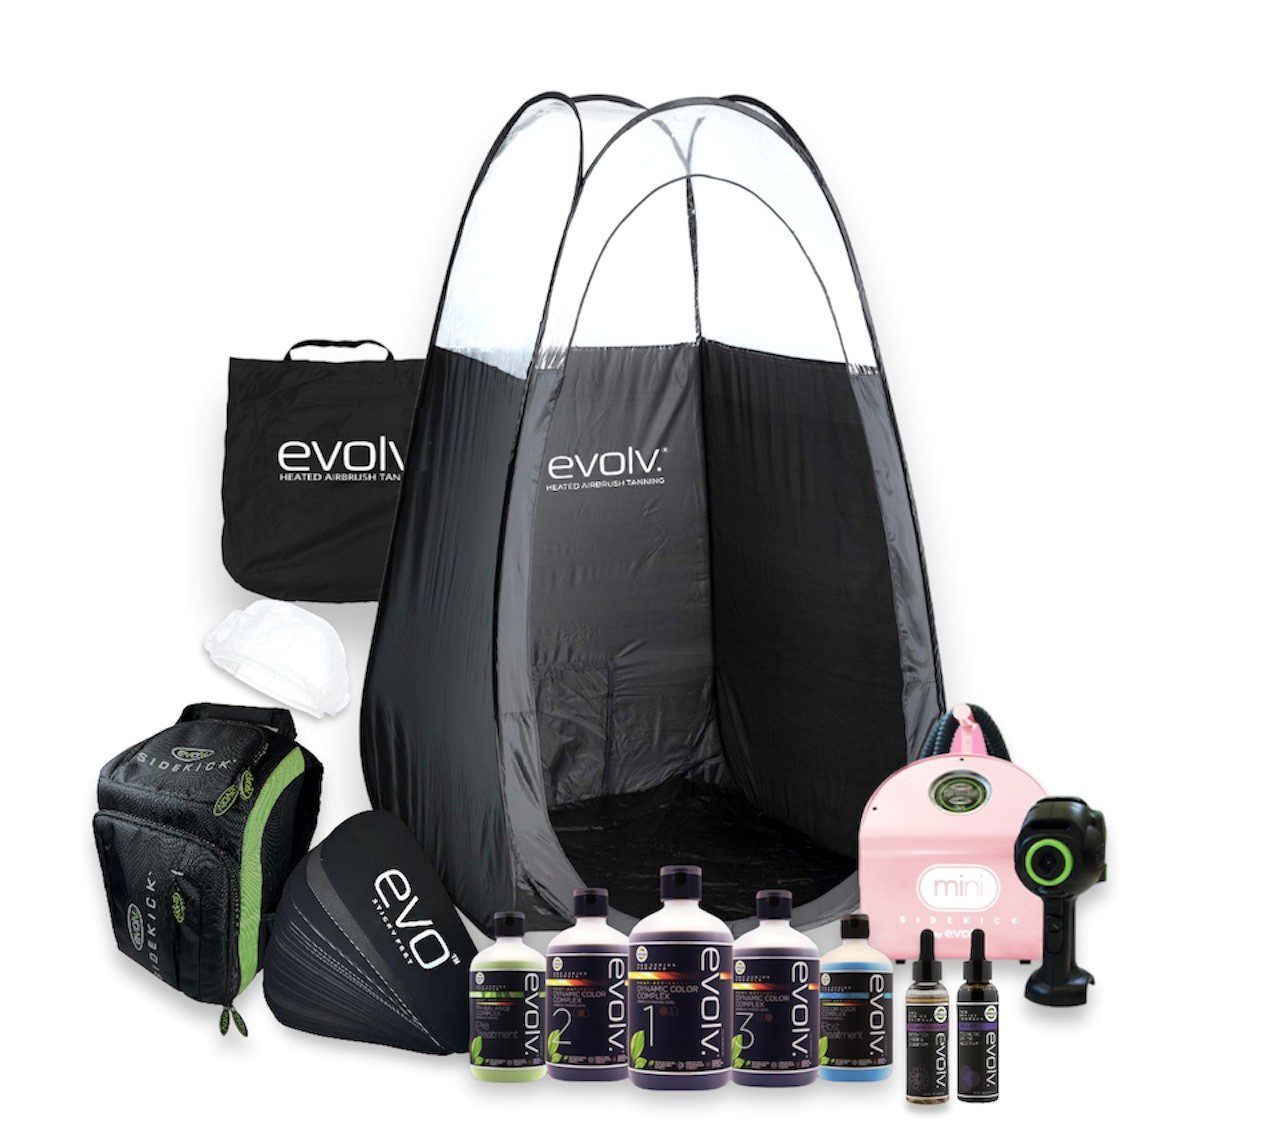 Full Sidekick Mini (Pink) Business Kit with Pop Up Tent and Evolv Products